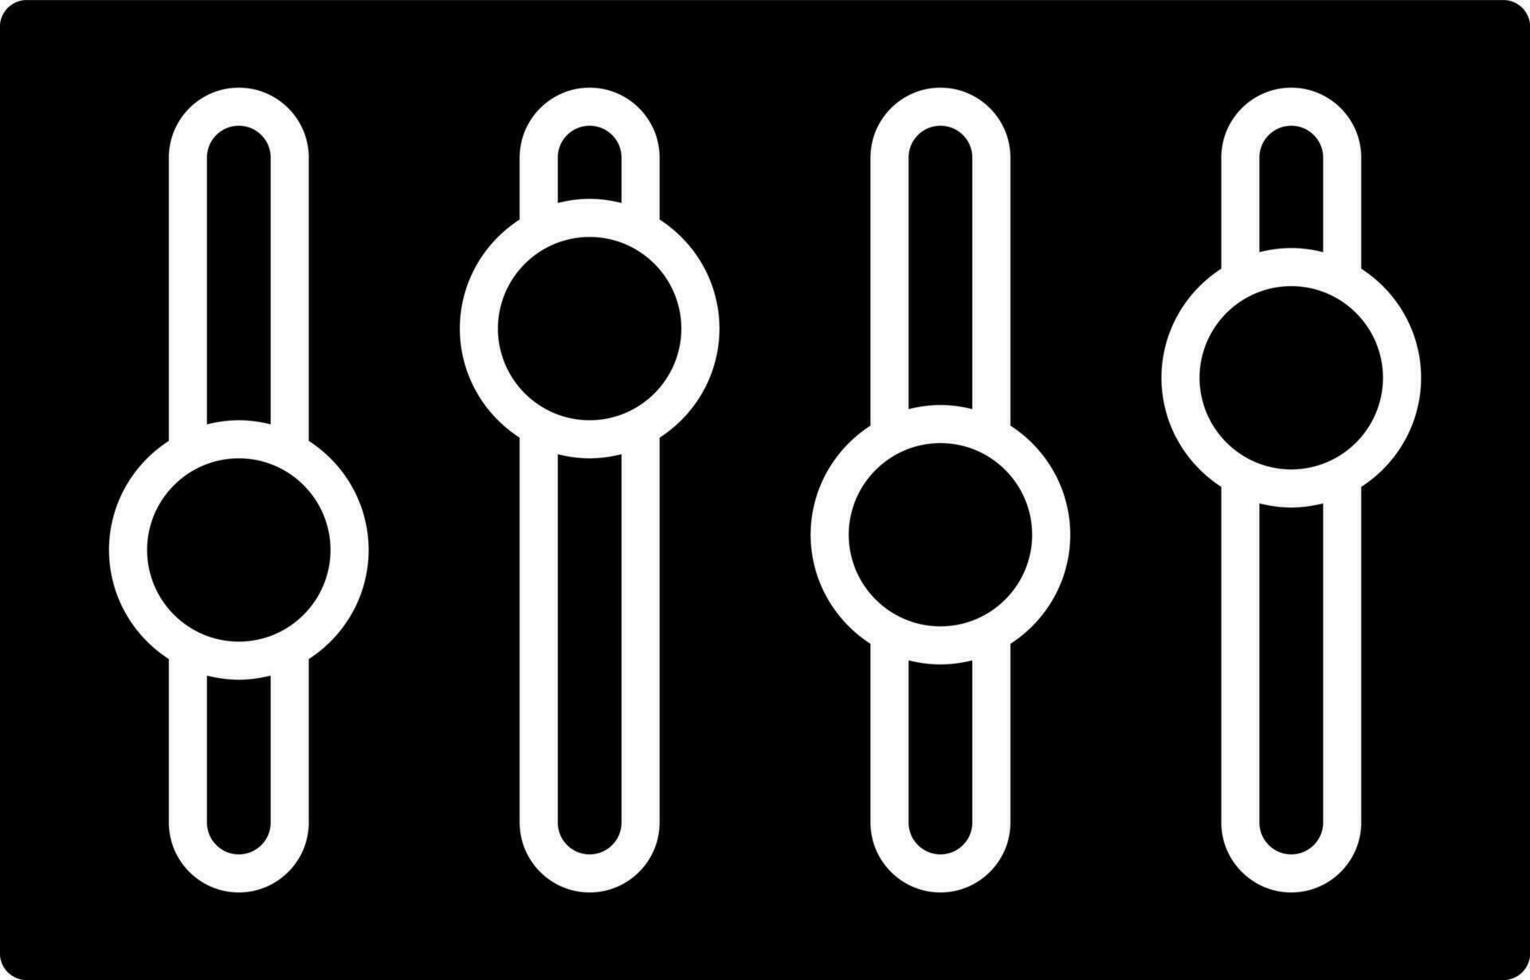 Illustration of sound mixer or equalizer glyph icon. vector